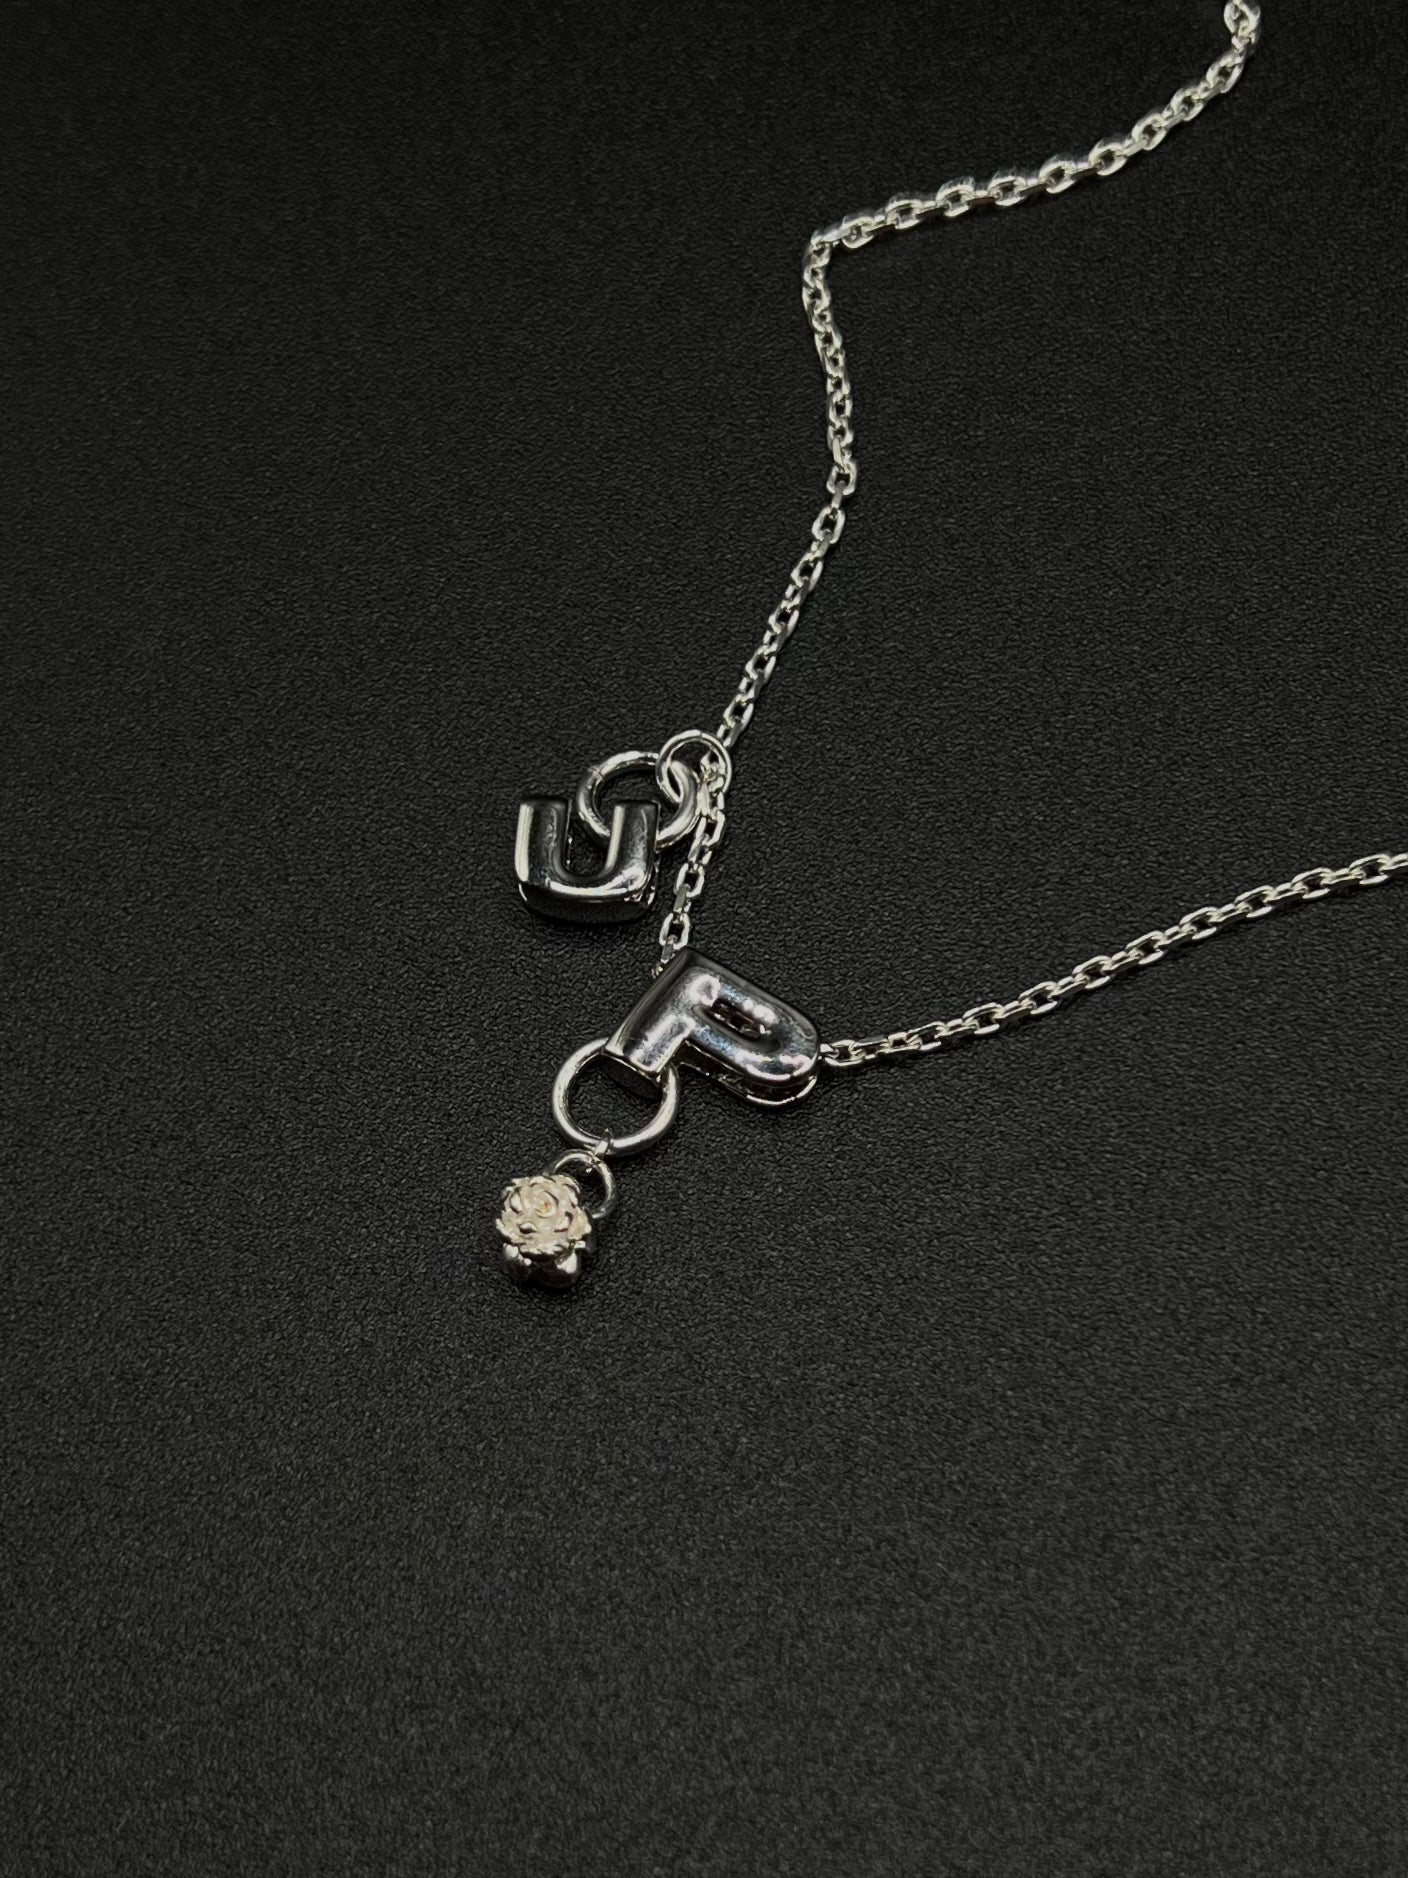 Initial "UP" necklace -silver925